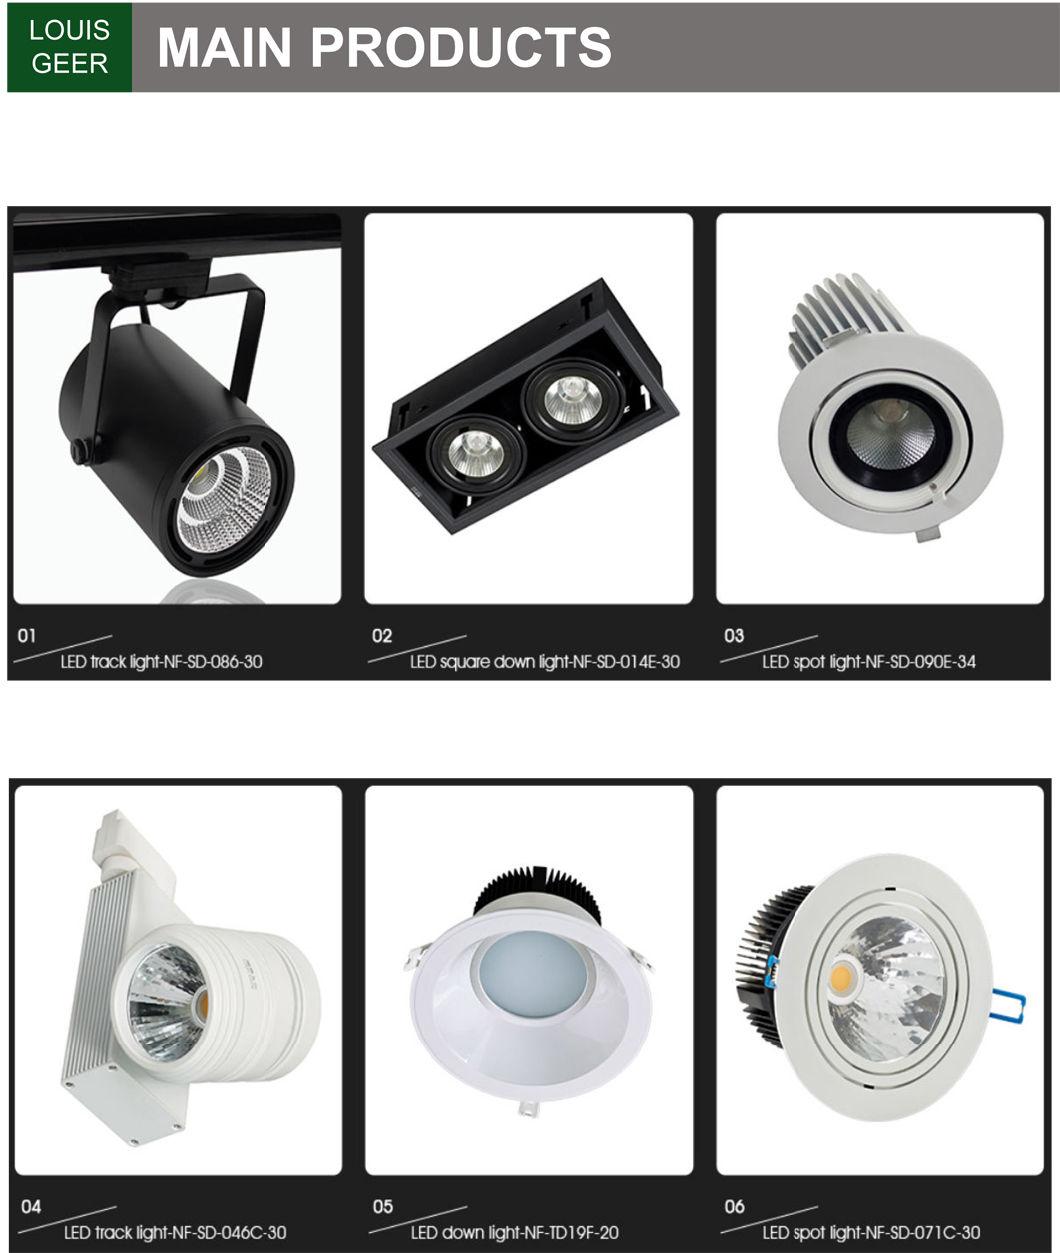 High Quality Dimmable Recessed LED Down Light LED Downlights